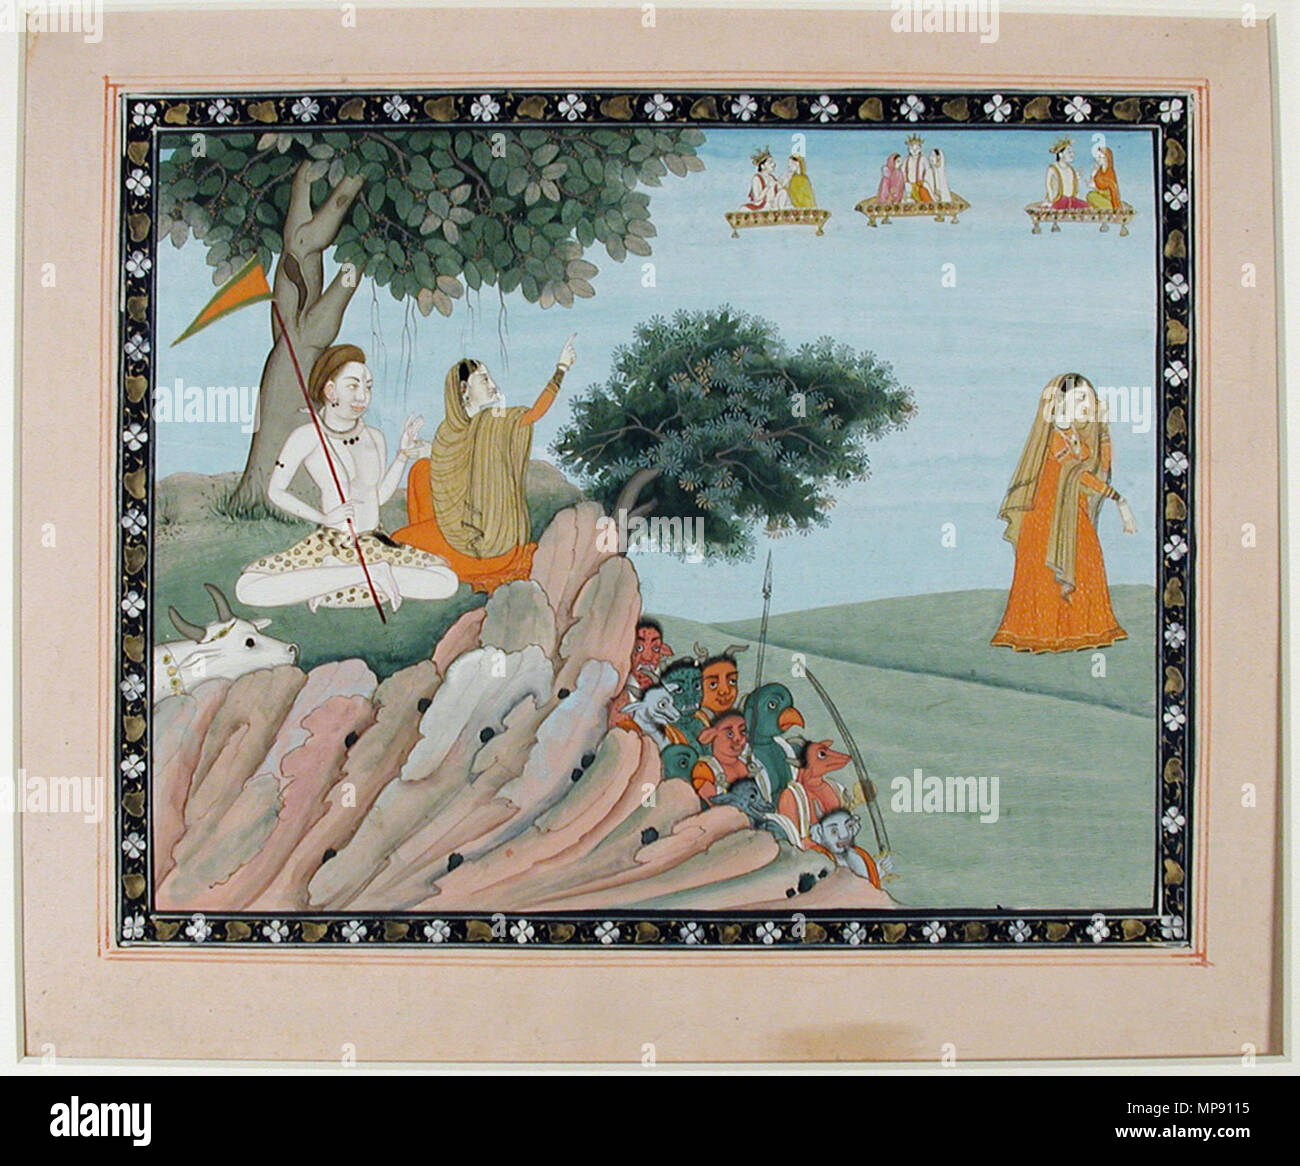 . English: Creation Date: ca. 1850 Sati show all gods went to sacrifice of Daksha so she also went. Creation Place/Subject: India State-Province: Himachal Pradesh Court: Kangra School: Pahari Media & Support: Opaque watercolor and gold on paper Display Dimensions: 9 1/8 in. x 11 7/32 in. (23.2 cm x 28.5 cm) Credit Line: Edwin Binney 3rd Collection Accession Number: 1990.1311 Collection: <a href='http://www.sdmart.org/art/our-collection/asian-art' rel='nofollow'>The San Diego Museum of Art</a> . 13 September 2001, 14:26:16. English: thesandiegomuseumofartcollection 1115 Shiva and Parvati (Shiva Stock Photo